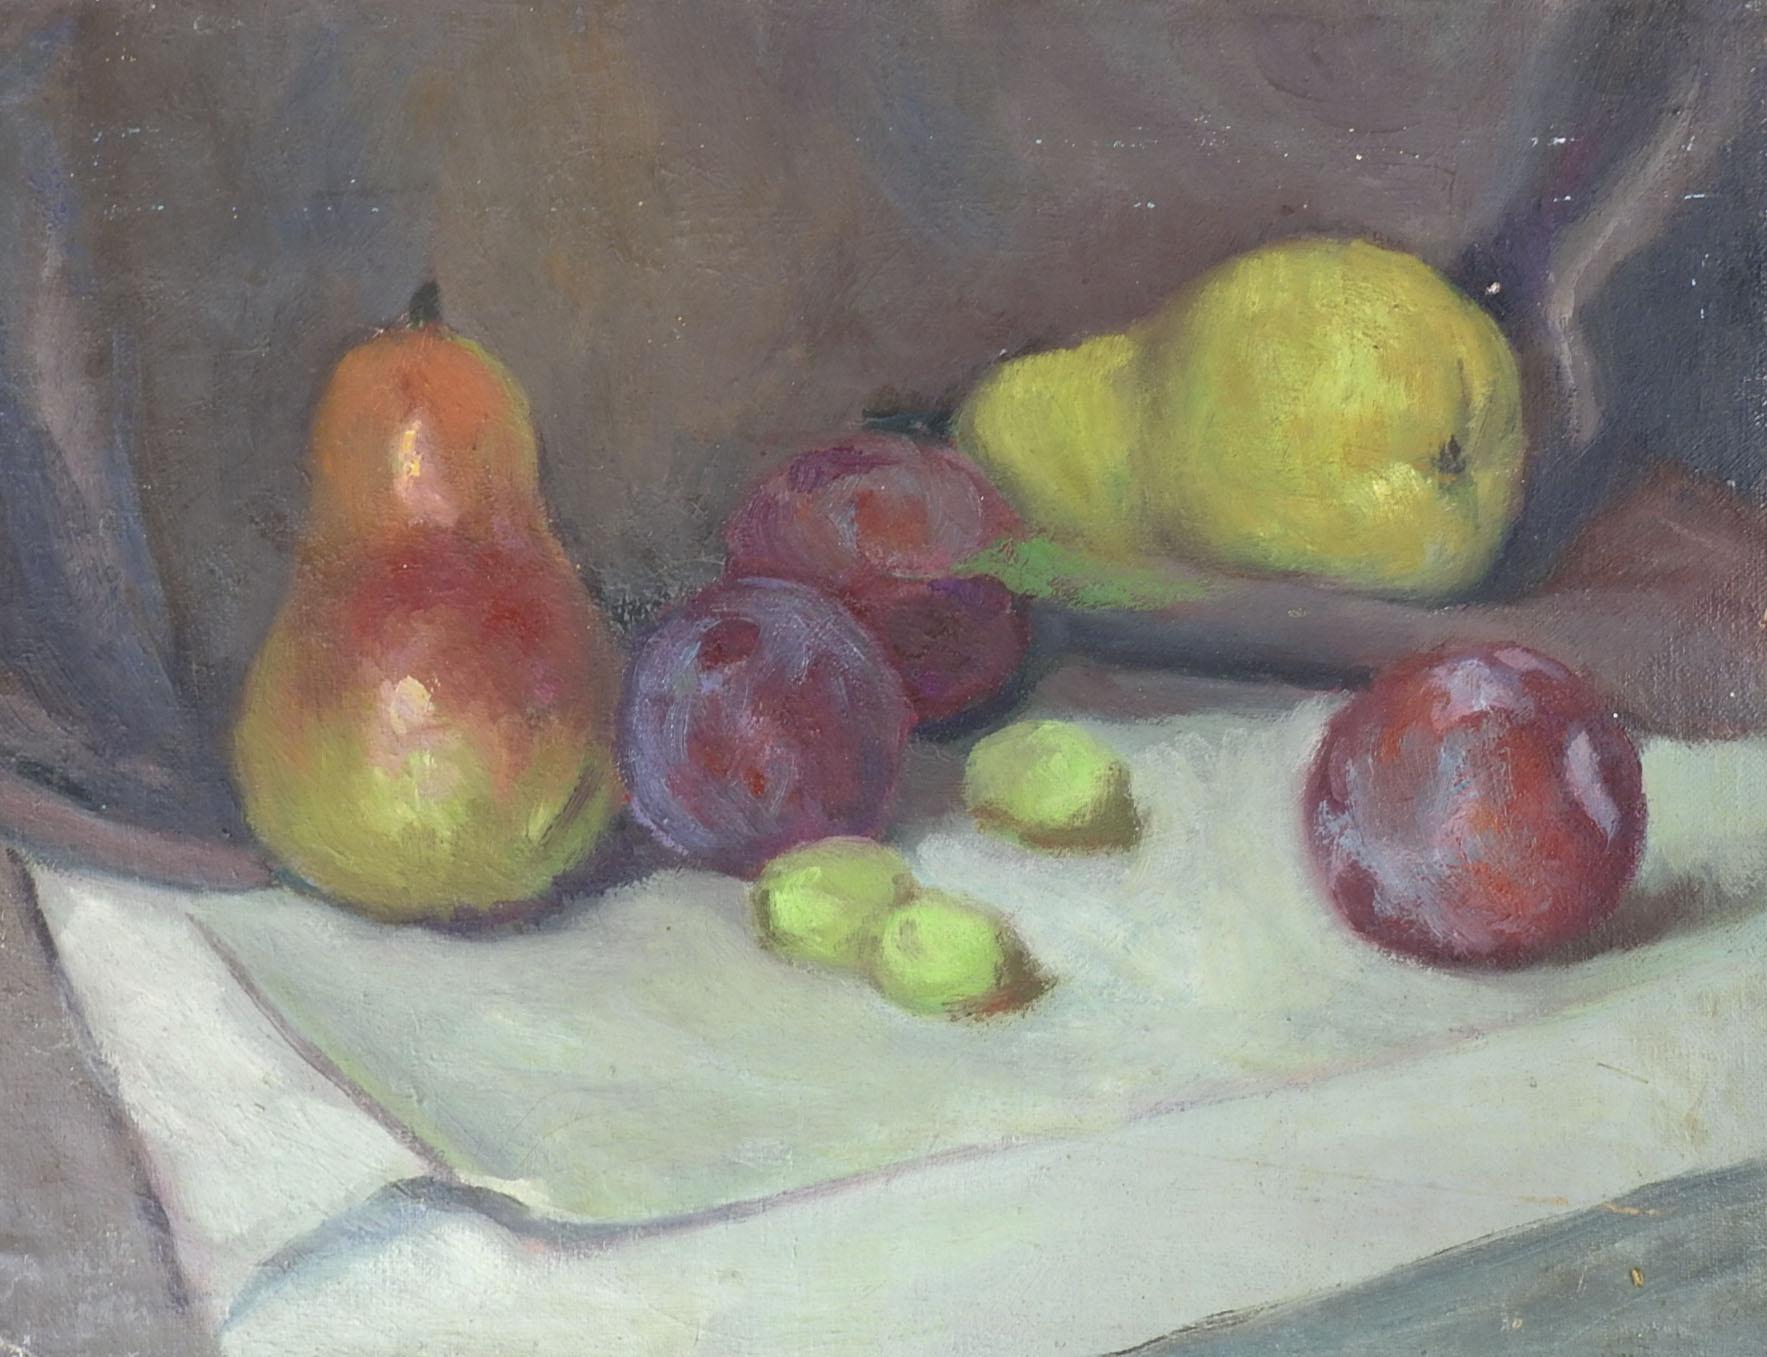 Vintage oil on canvas board still life with pears and plums. Unsigned. Unframed, edge and corner wear.